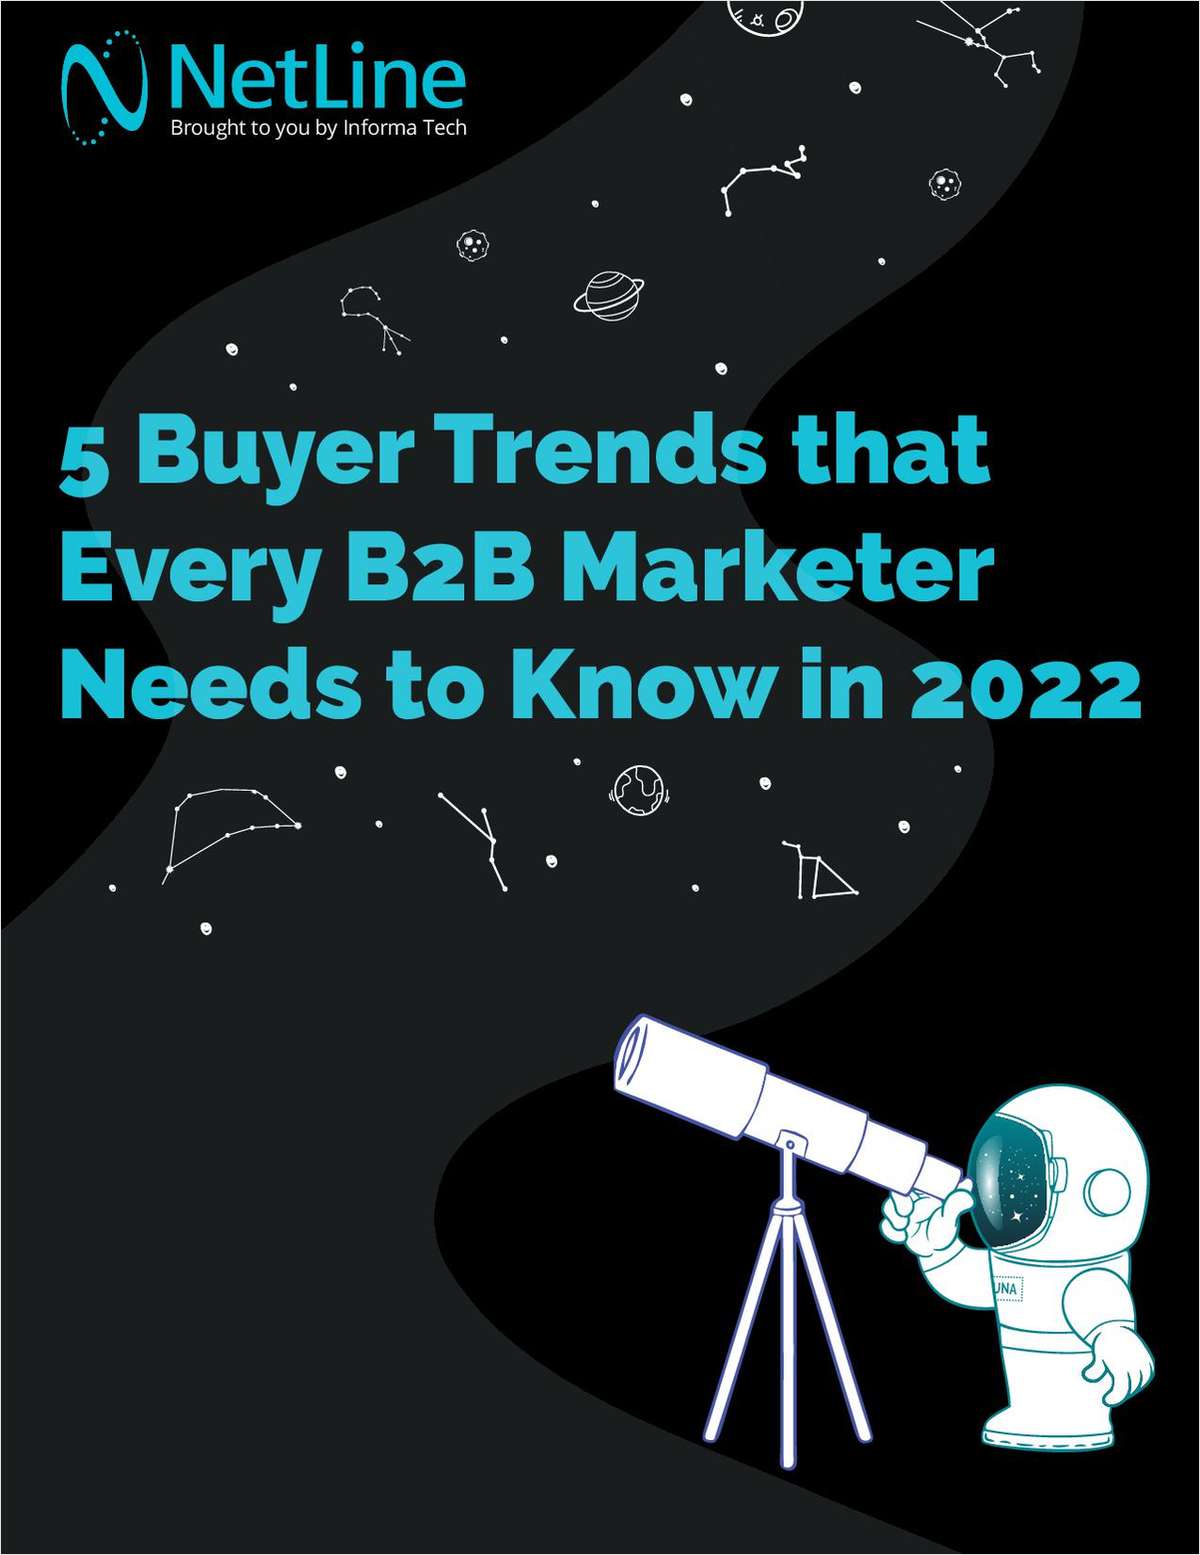 5 Buyer Trends that Every B2B Marketer Needs to Know in 2022